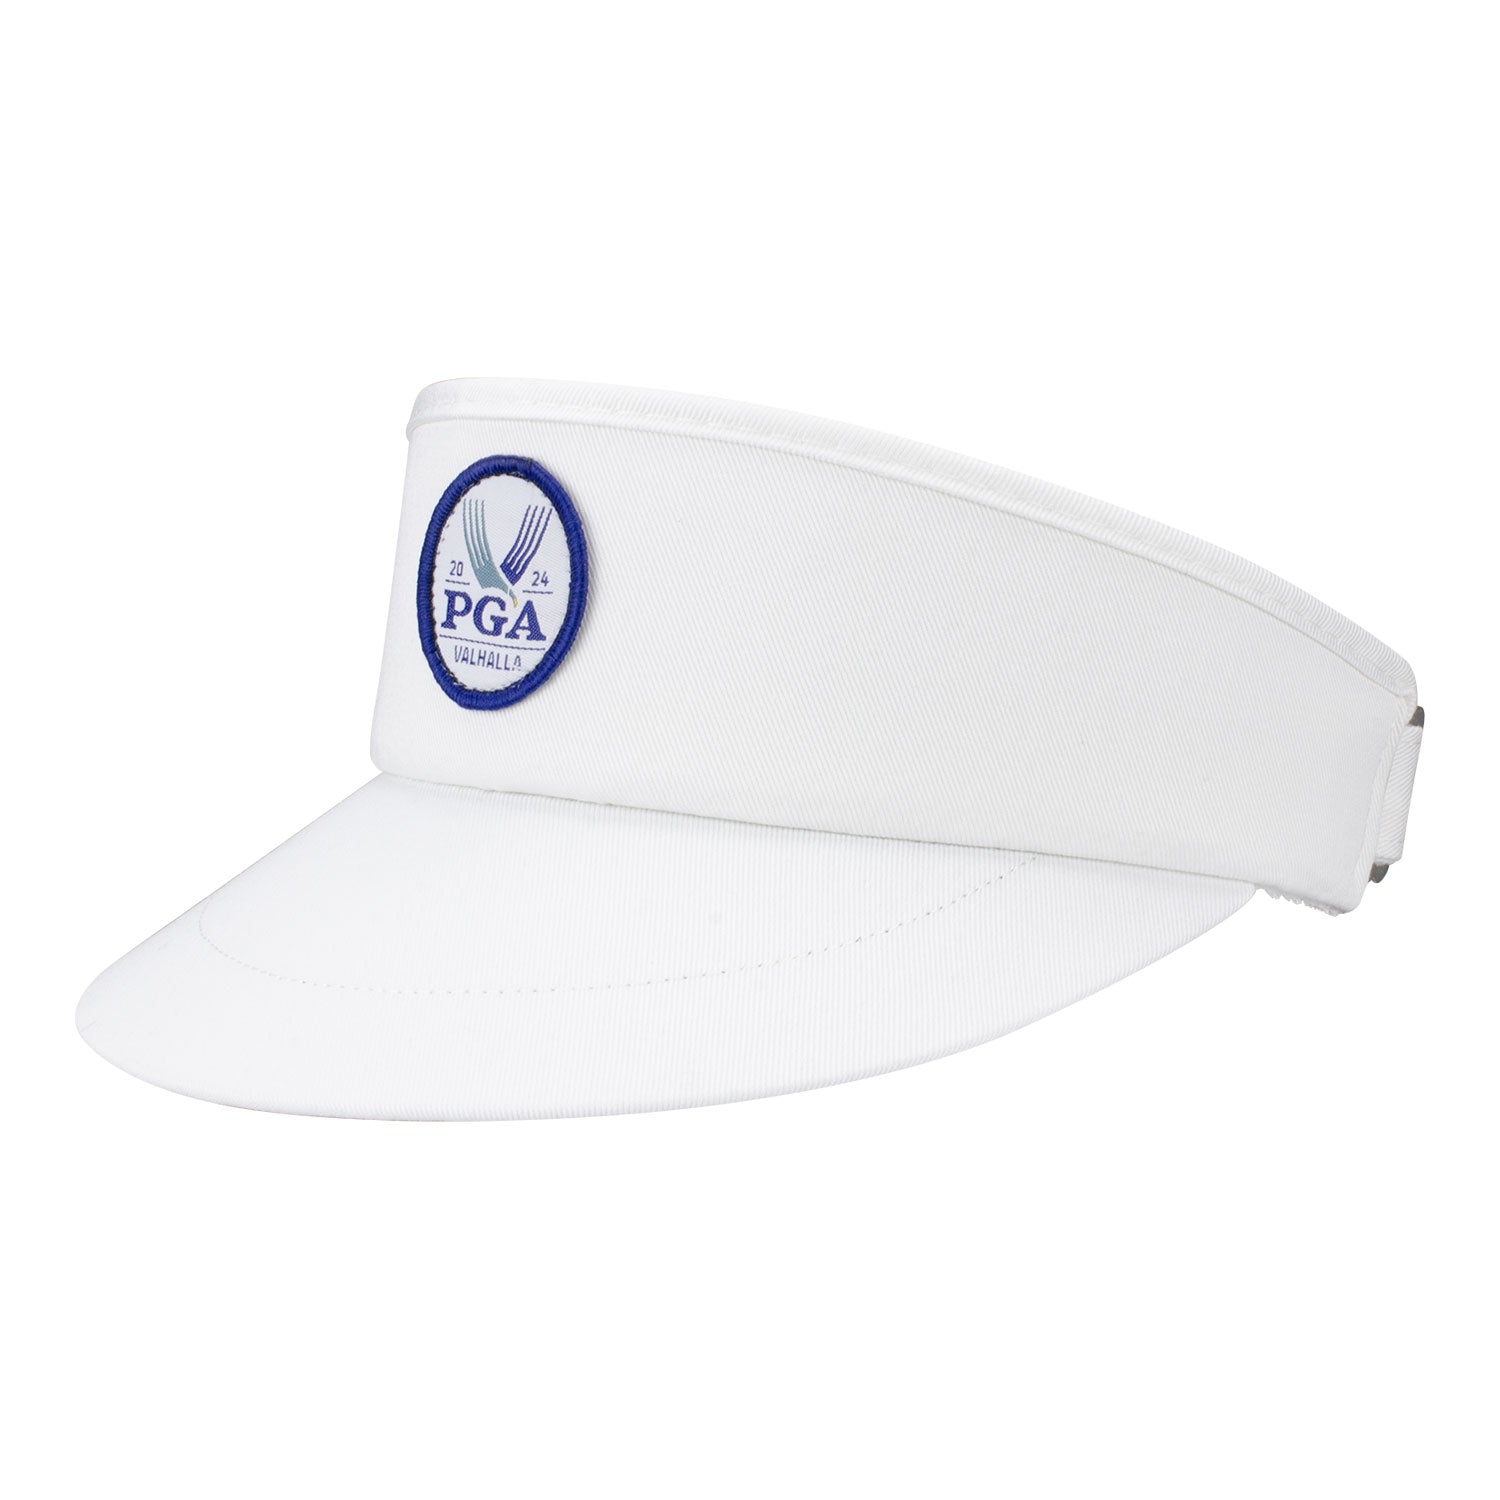 Imperial 3161 - The Original Tour Visor in White - Angled Front Left View